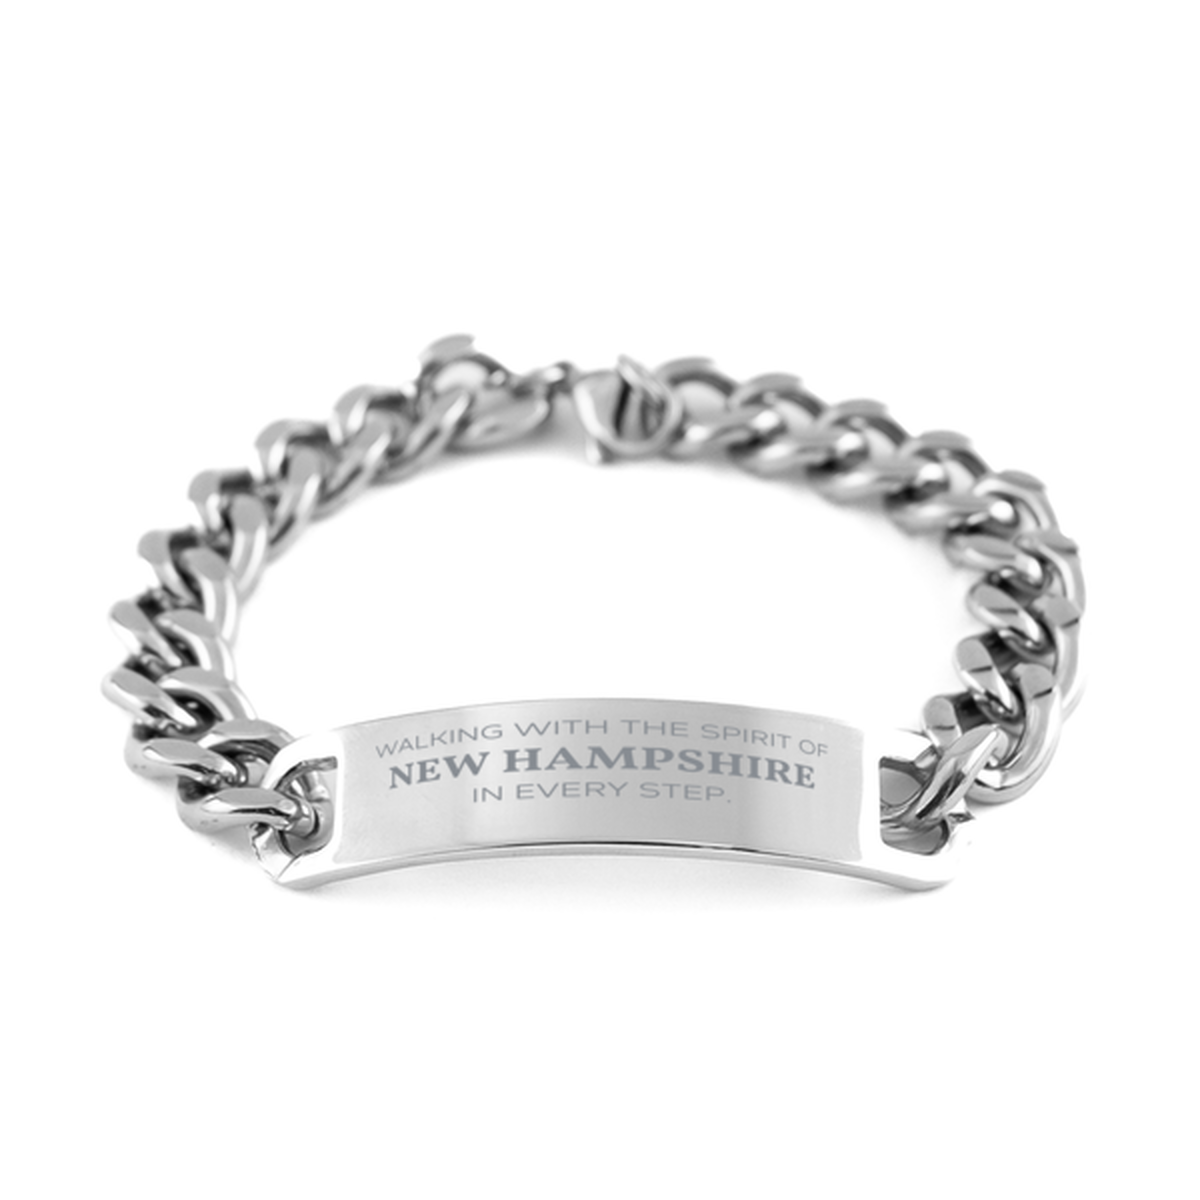 New Hampshire Gifts, Walking with the spirit, Love New Hampshire Birthday Christmas Cuban Chain Stainless Steel Bracelet For New Hampshire People, Men, Women, Friends